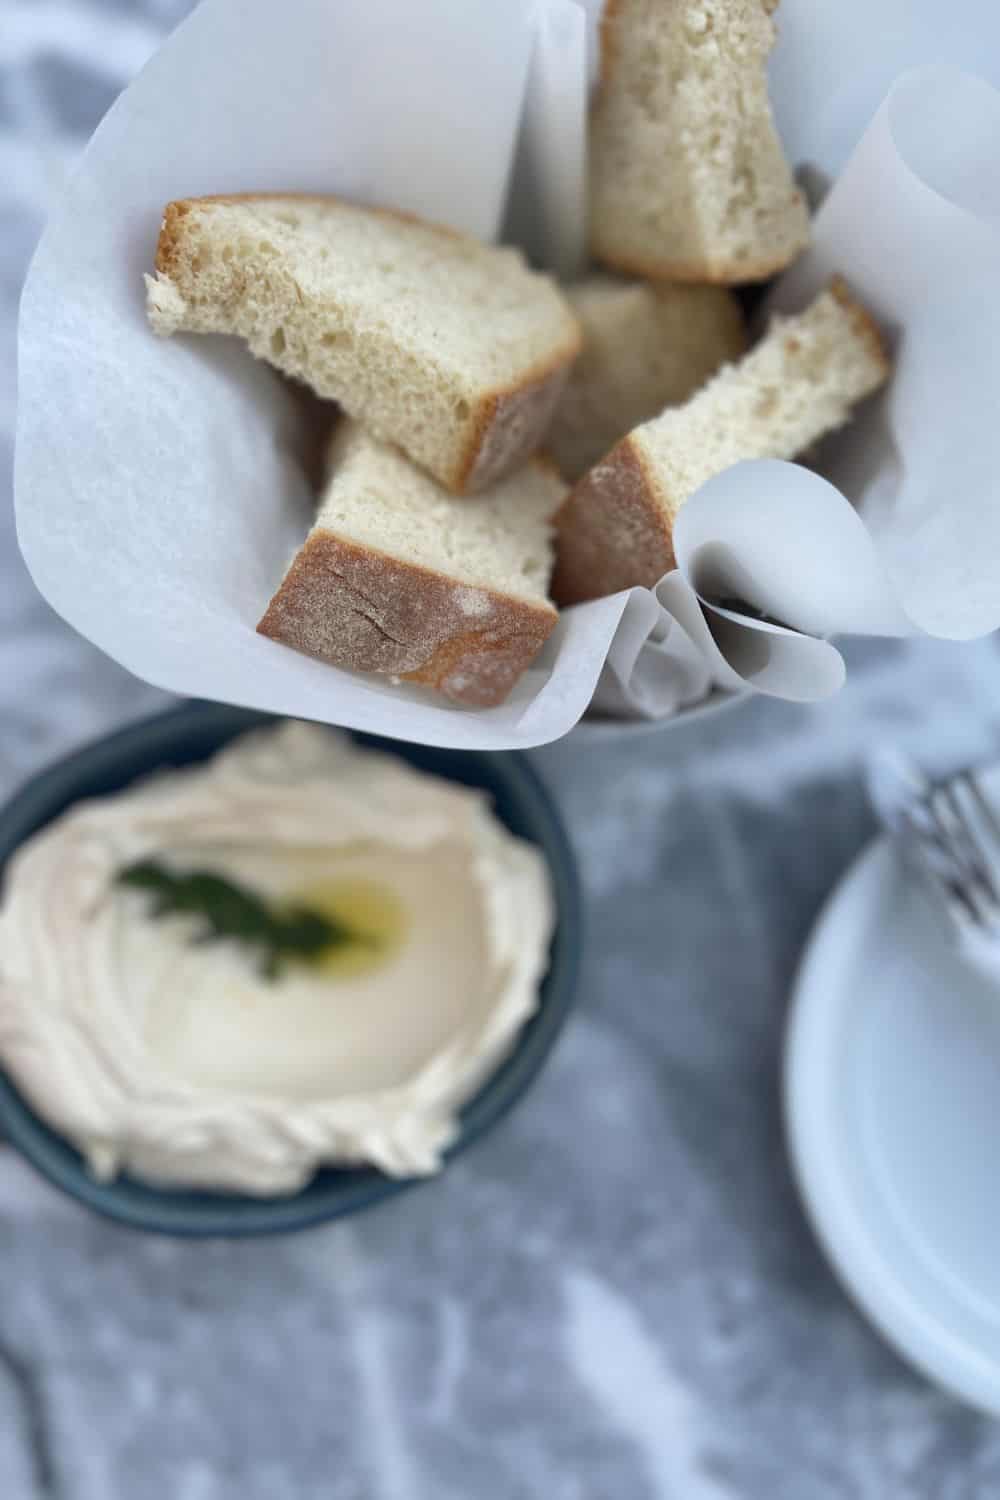 A casual dining setup featuring a paper-lined basket of freshly sliced bread with a side of creamy spread topped with olive oil and a single green leaf, presented on a marble table with a soft-focus background